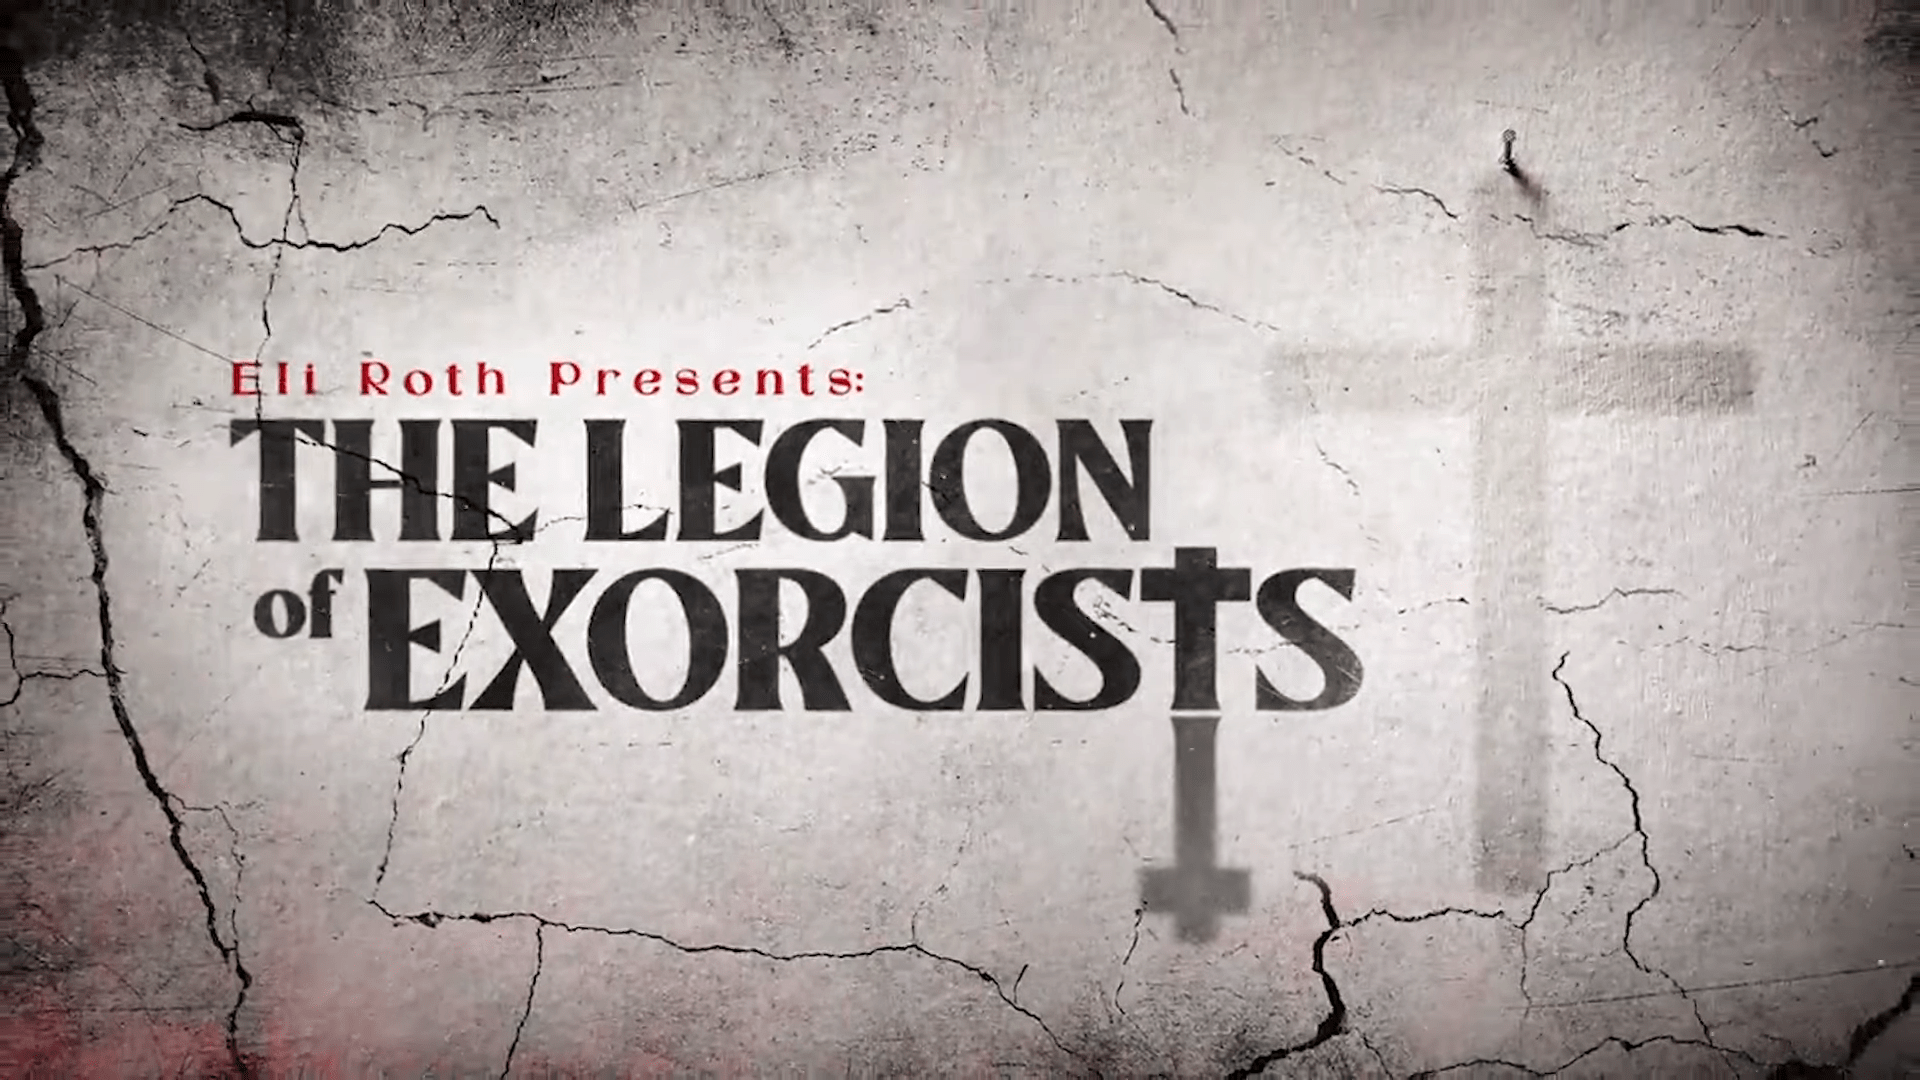 TRAILER for Eli Roth Presents The Legion of Exorcists on Travel Channel 1 30 screenshot